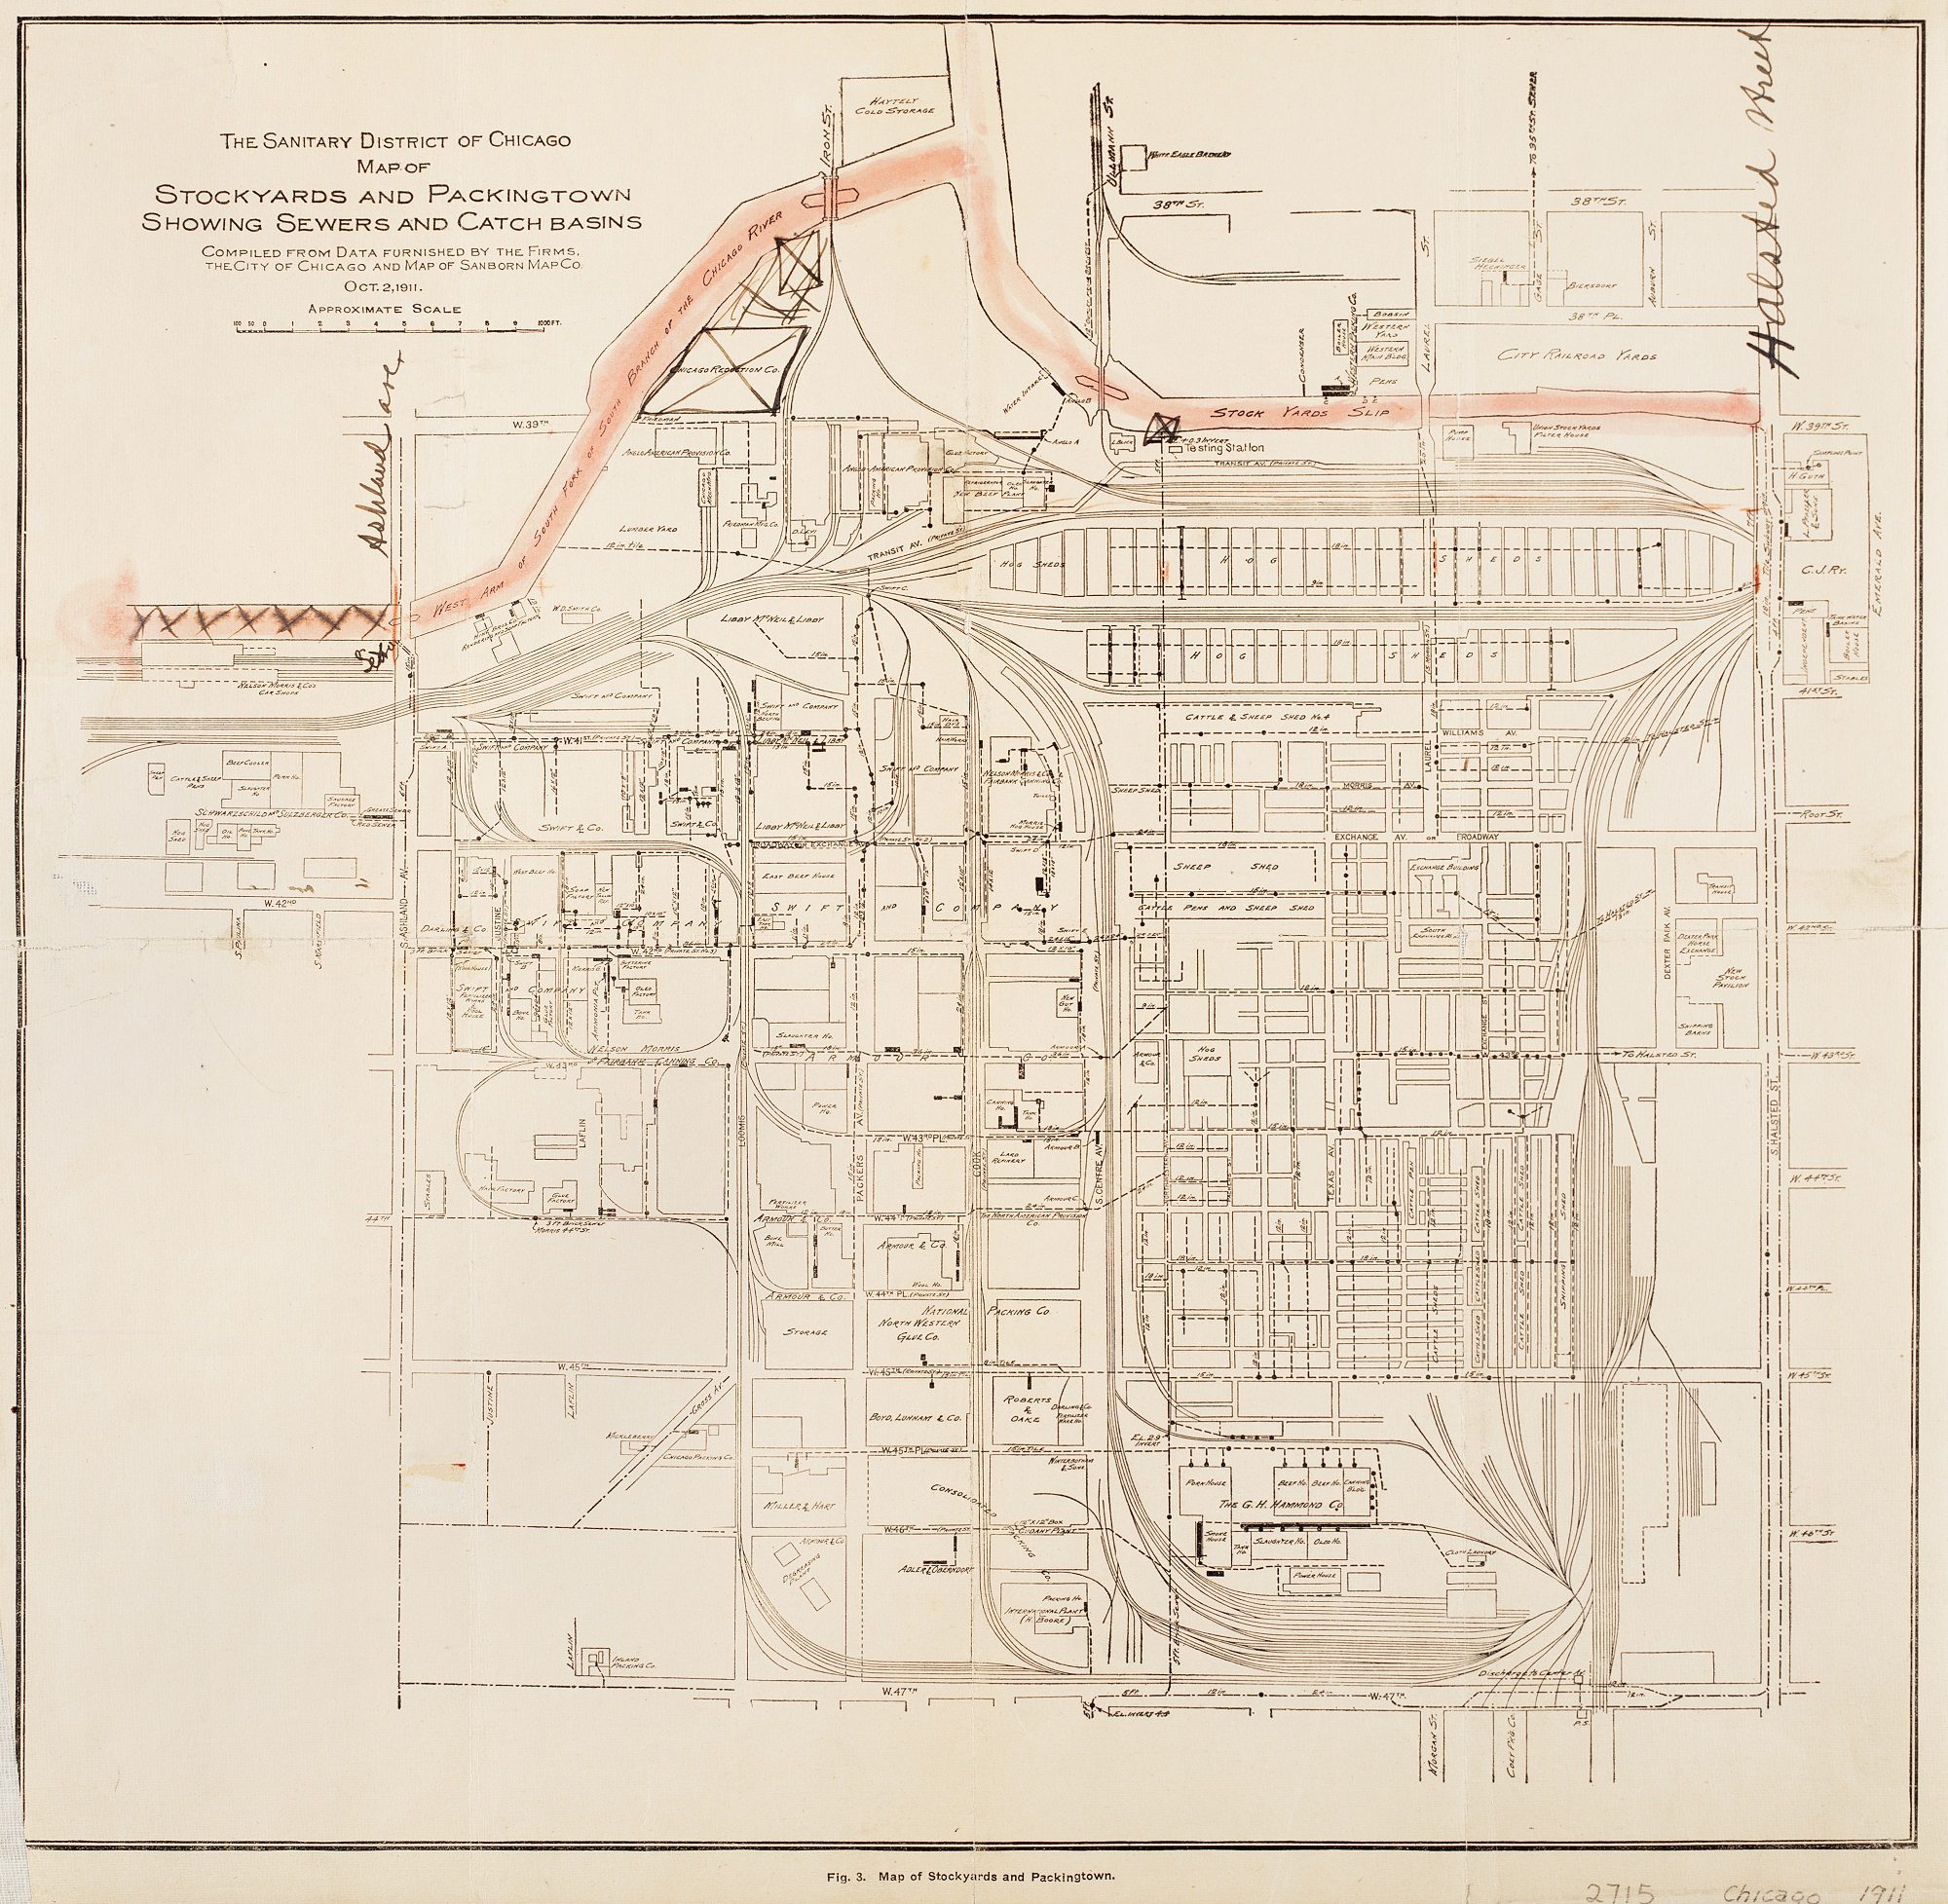 The Sanitary District of Chicago Map of Stockyards and Packingtown Showing Sewers and Catch Basins, Chicago, 1911. Published by Sanborn Map Co.